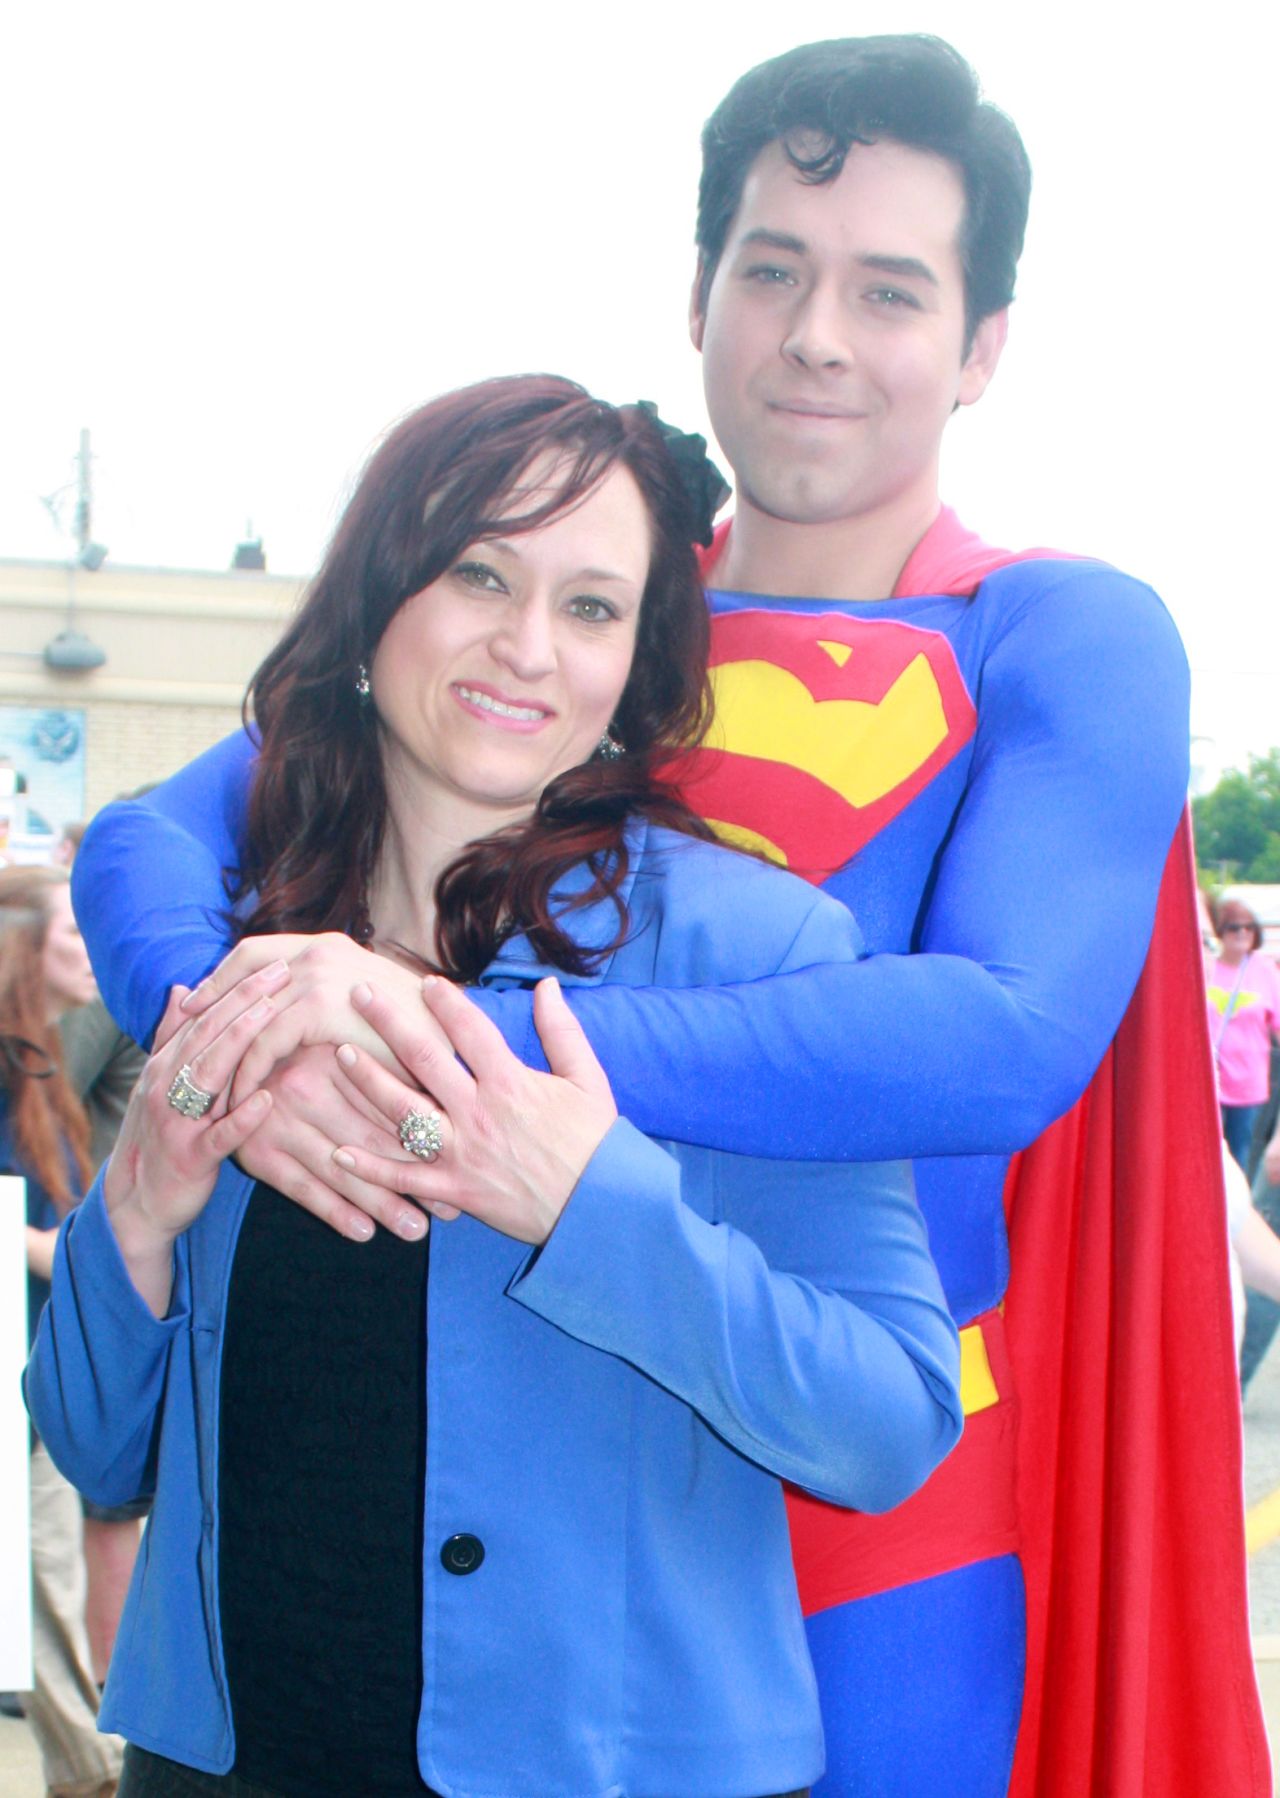 <a href="http://ireport.cnn.com/docs/DOC-986894">Jamie Kelley, </a>here with his wife, Ronda, got married on October 9, 2009 - 13 years to the day after Clark Kent married Lois Lane in the comics. The couple often visits Metropolis, Illinois, for its annual <a href="http://www.cnn.com/2013/06/06/travel/town-where-superman-lives/">"Superman Celebration." </a>As for why Superman has been such a big part of Kelley's life, he said the character has an aspirational quality he admires. "The idea of what we can be, if we hold fast to our humanity, our hopes. Superman's embodiment of this is my favorite memory of the character, what draws me to him, and why he is so iconic."